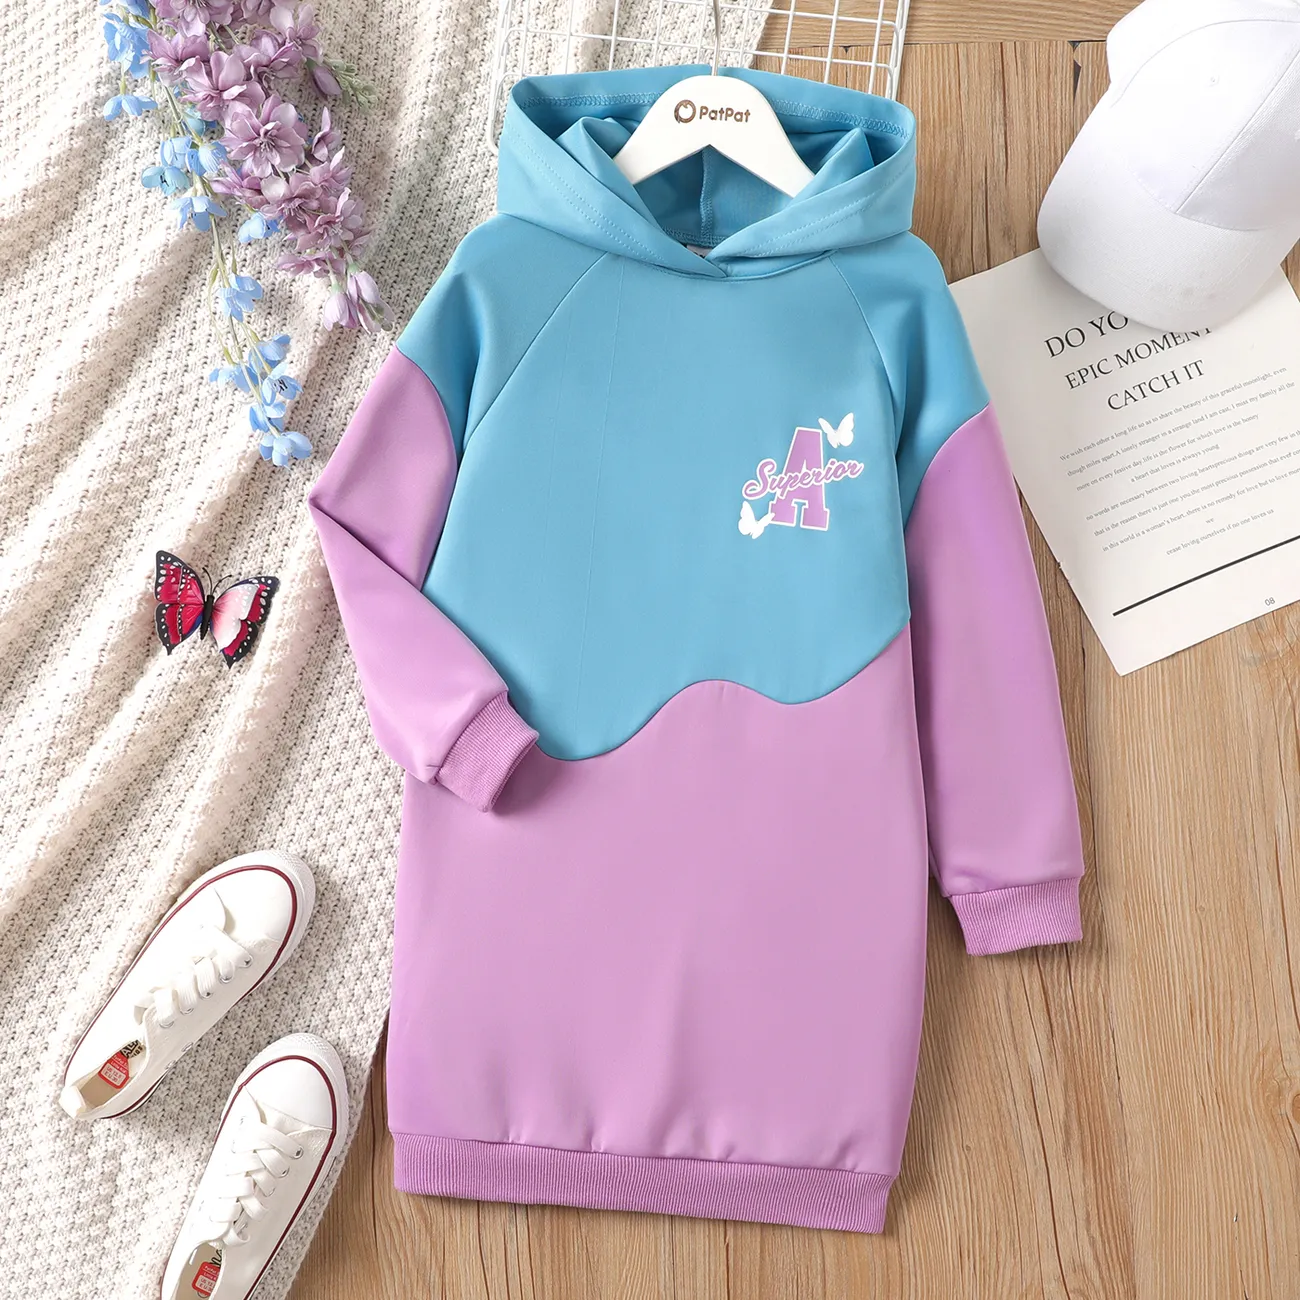 Kid Girl Letters Graphic Colorblock Long-sleeve Hooded Dress Only $11.04  PatPat US Mobile